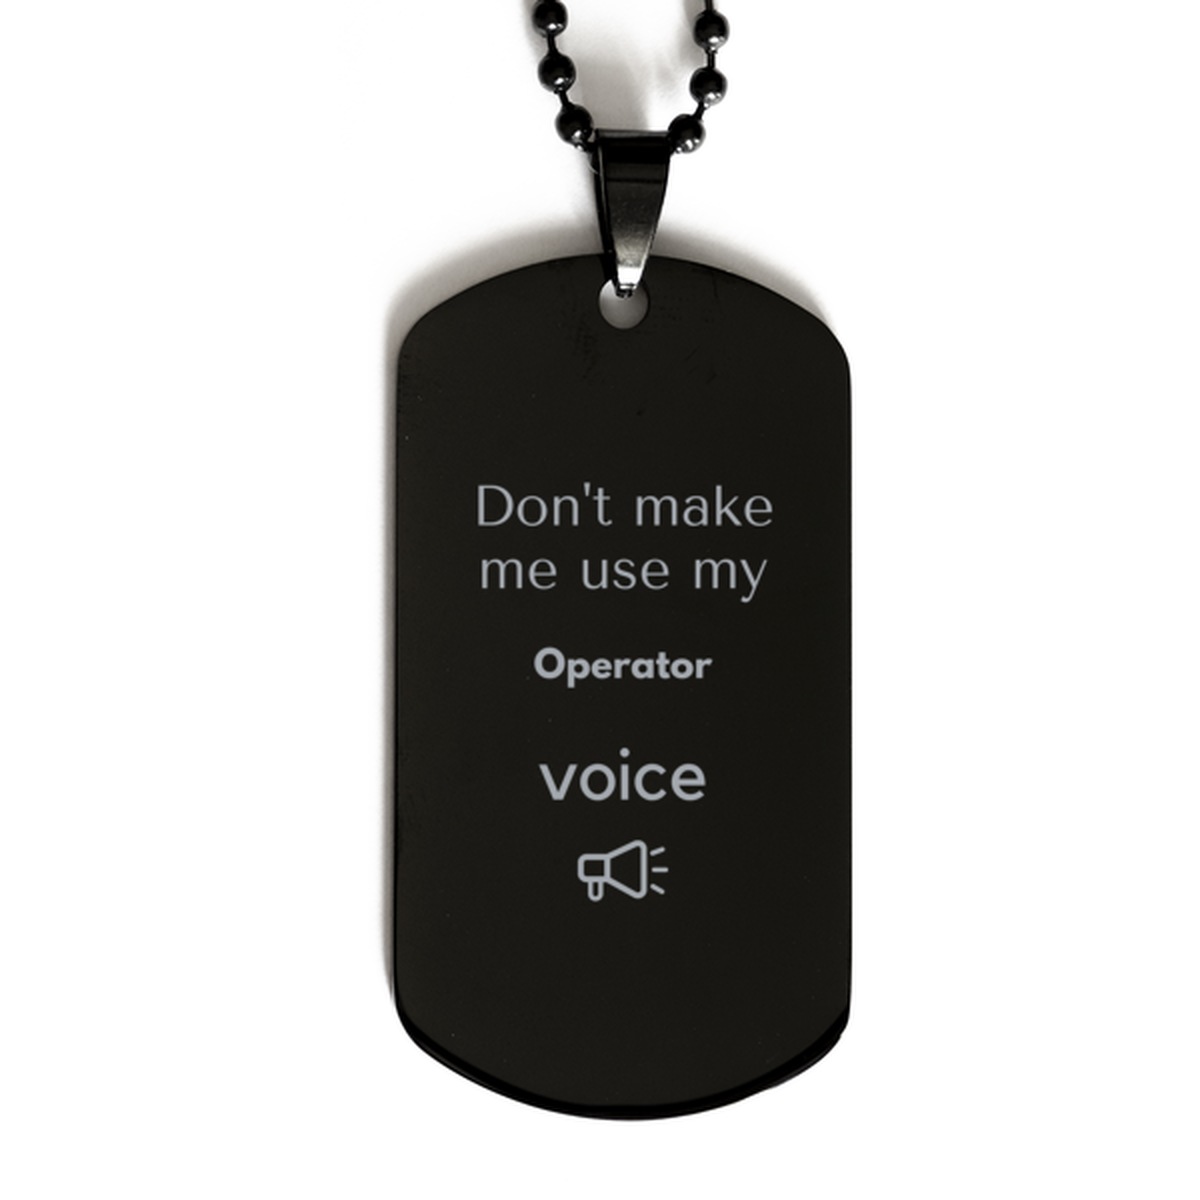 Don't make me use my Operator voice, Sarcasm Operator Gifts, Christmas Operator Black Dog Tag Birthday Unique Gifts For Operator Coworkers, Men, Women, Colleague, Friends